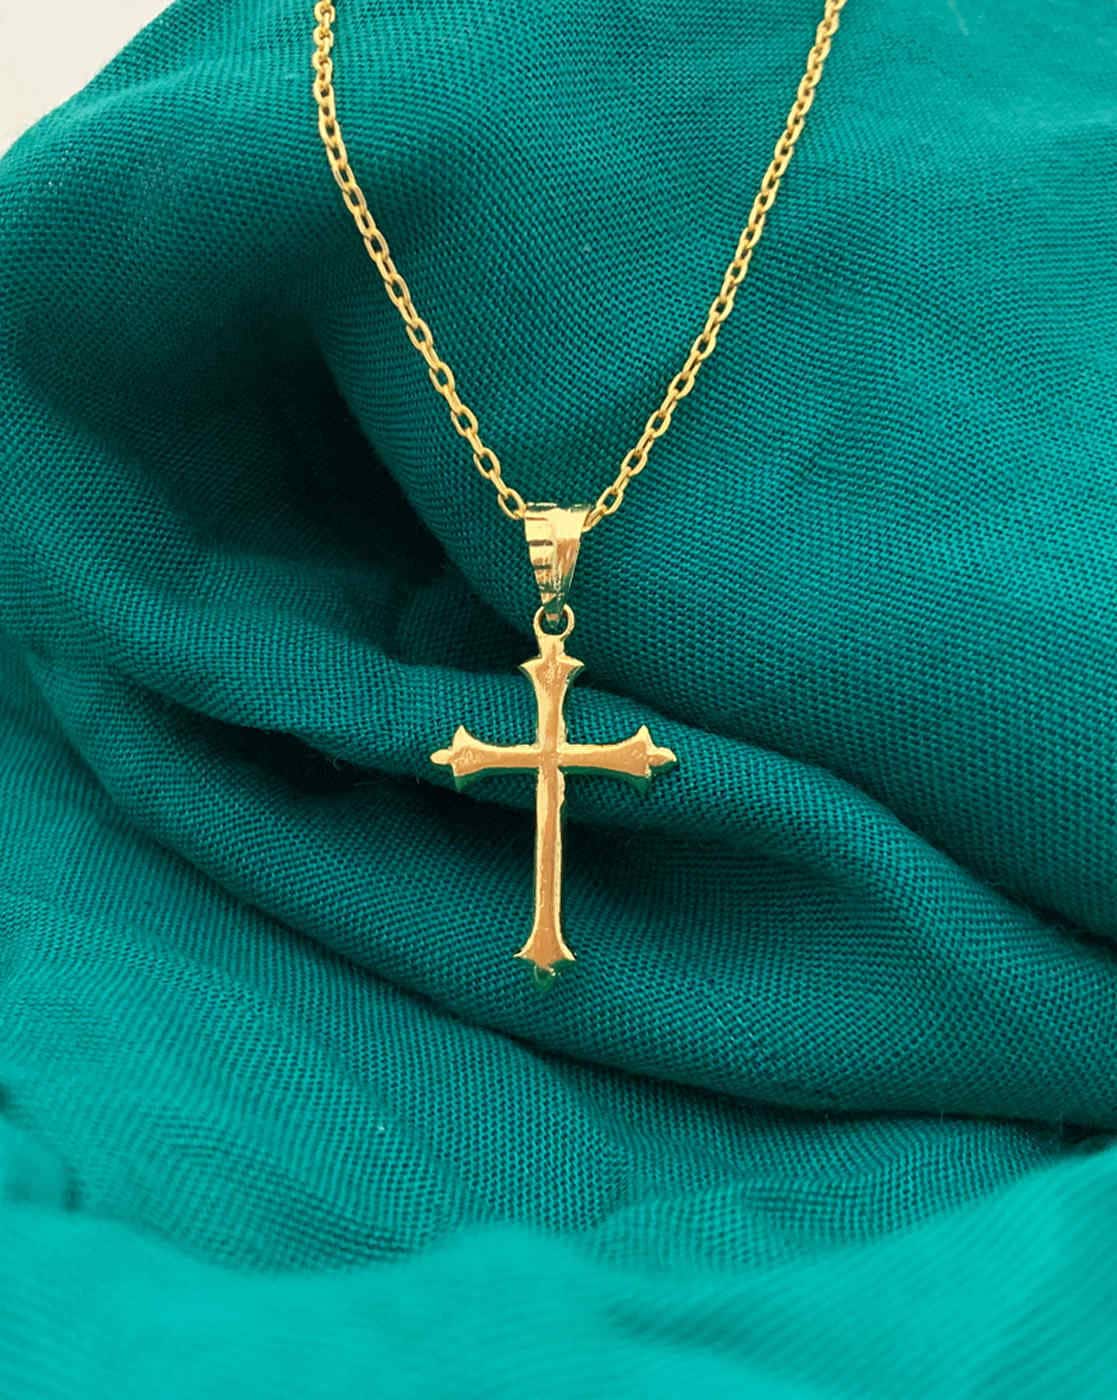 Buy Gold Cross Necklace, Women Religious Madonna Jewelry, French Style  Parisian Wedding, Rococo Style Necklaces, 18k Gold Vermeil, Paved Cross  Online in India - Etsy